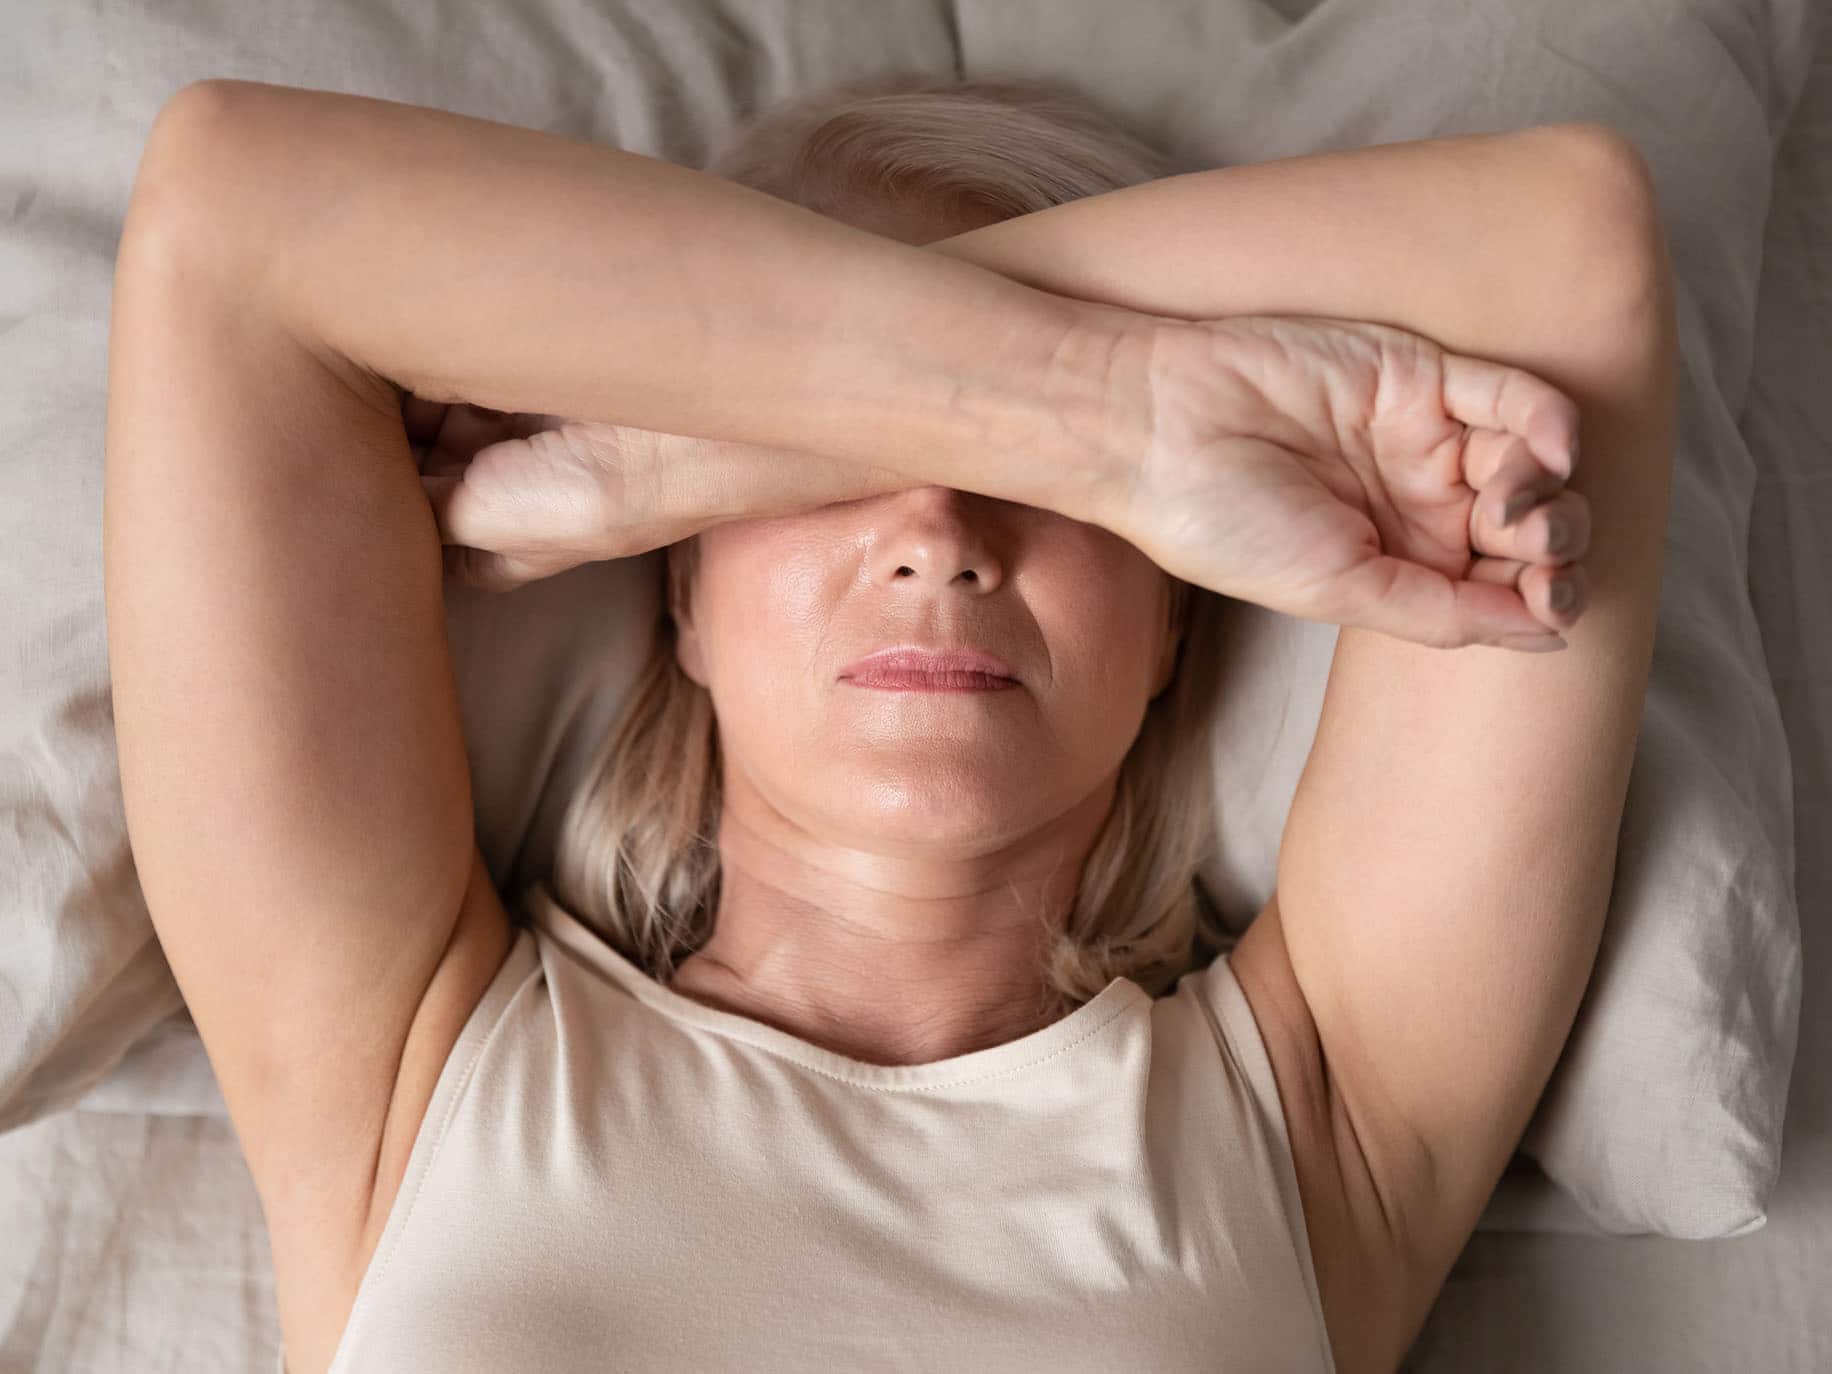 Every woman menopausal knows how annoying and frustrating night sweats can be. Here's what we can do about it